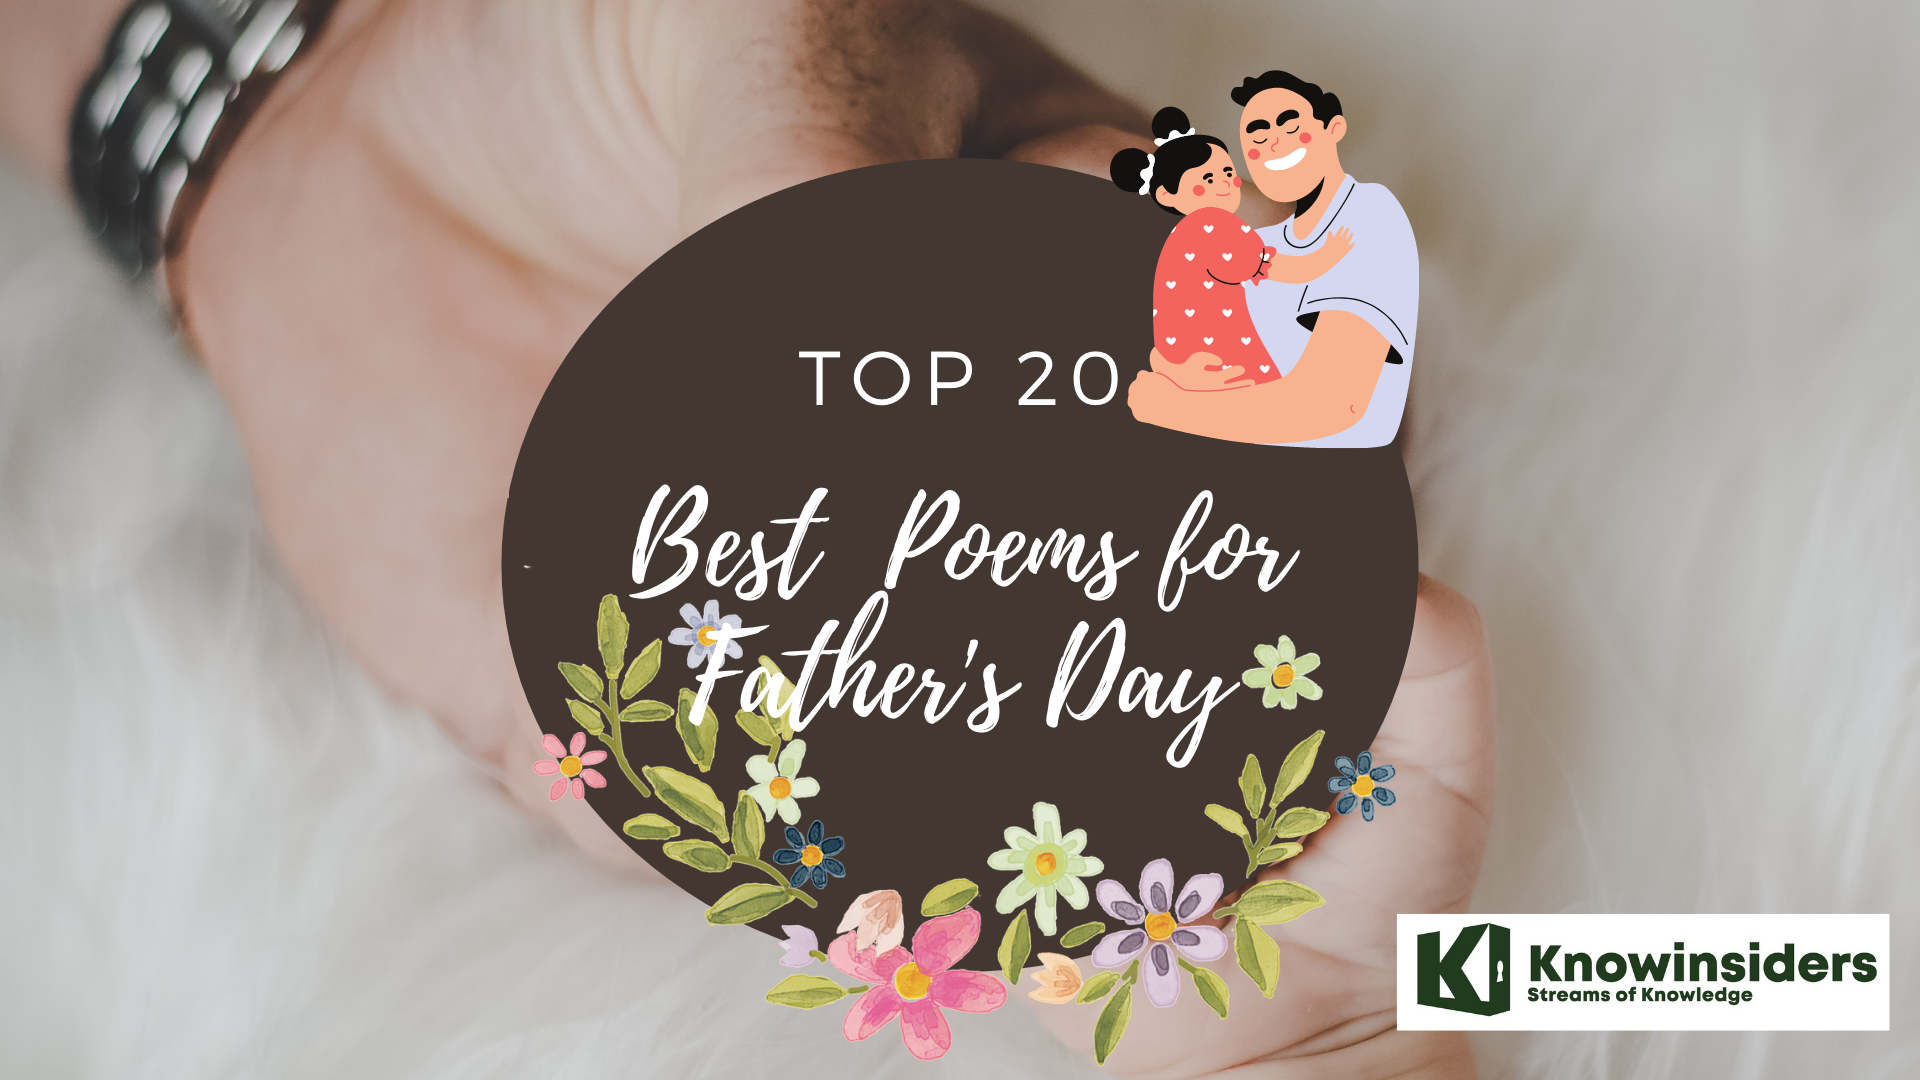 Top 20 Best and Most Popular Poems For Father's Day